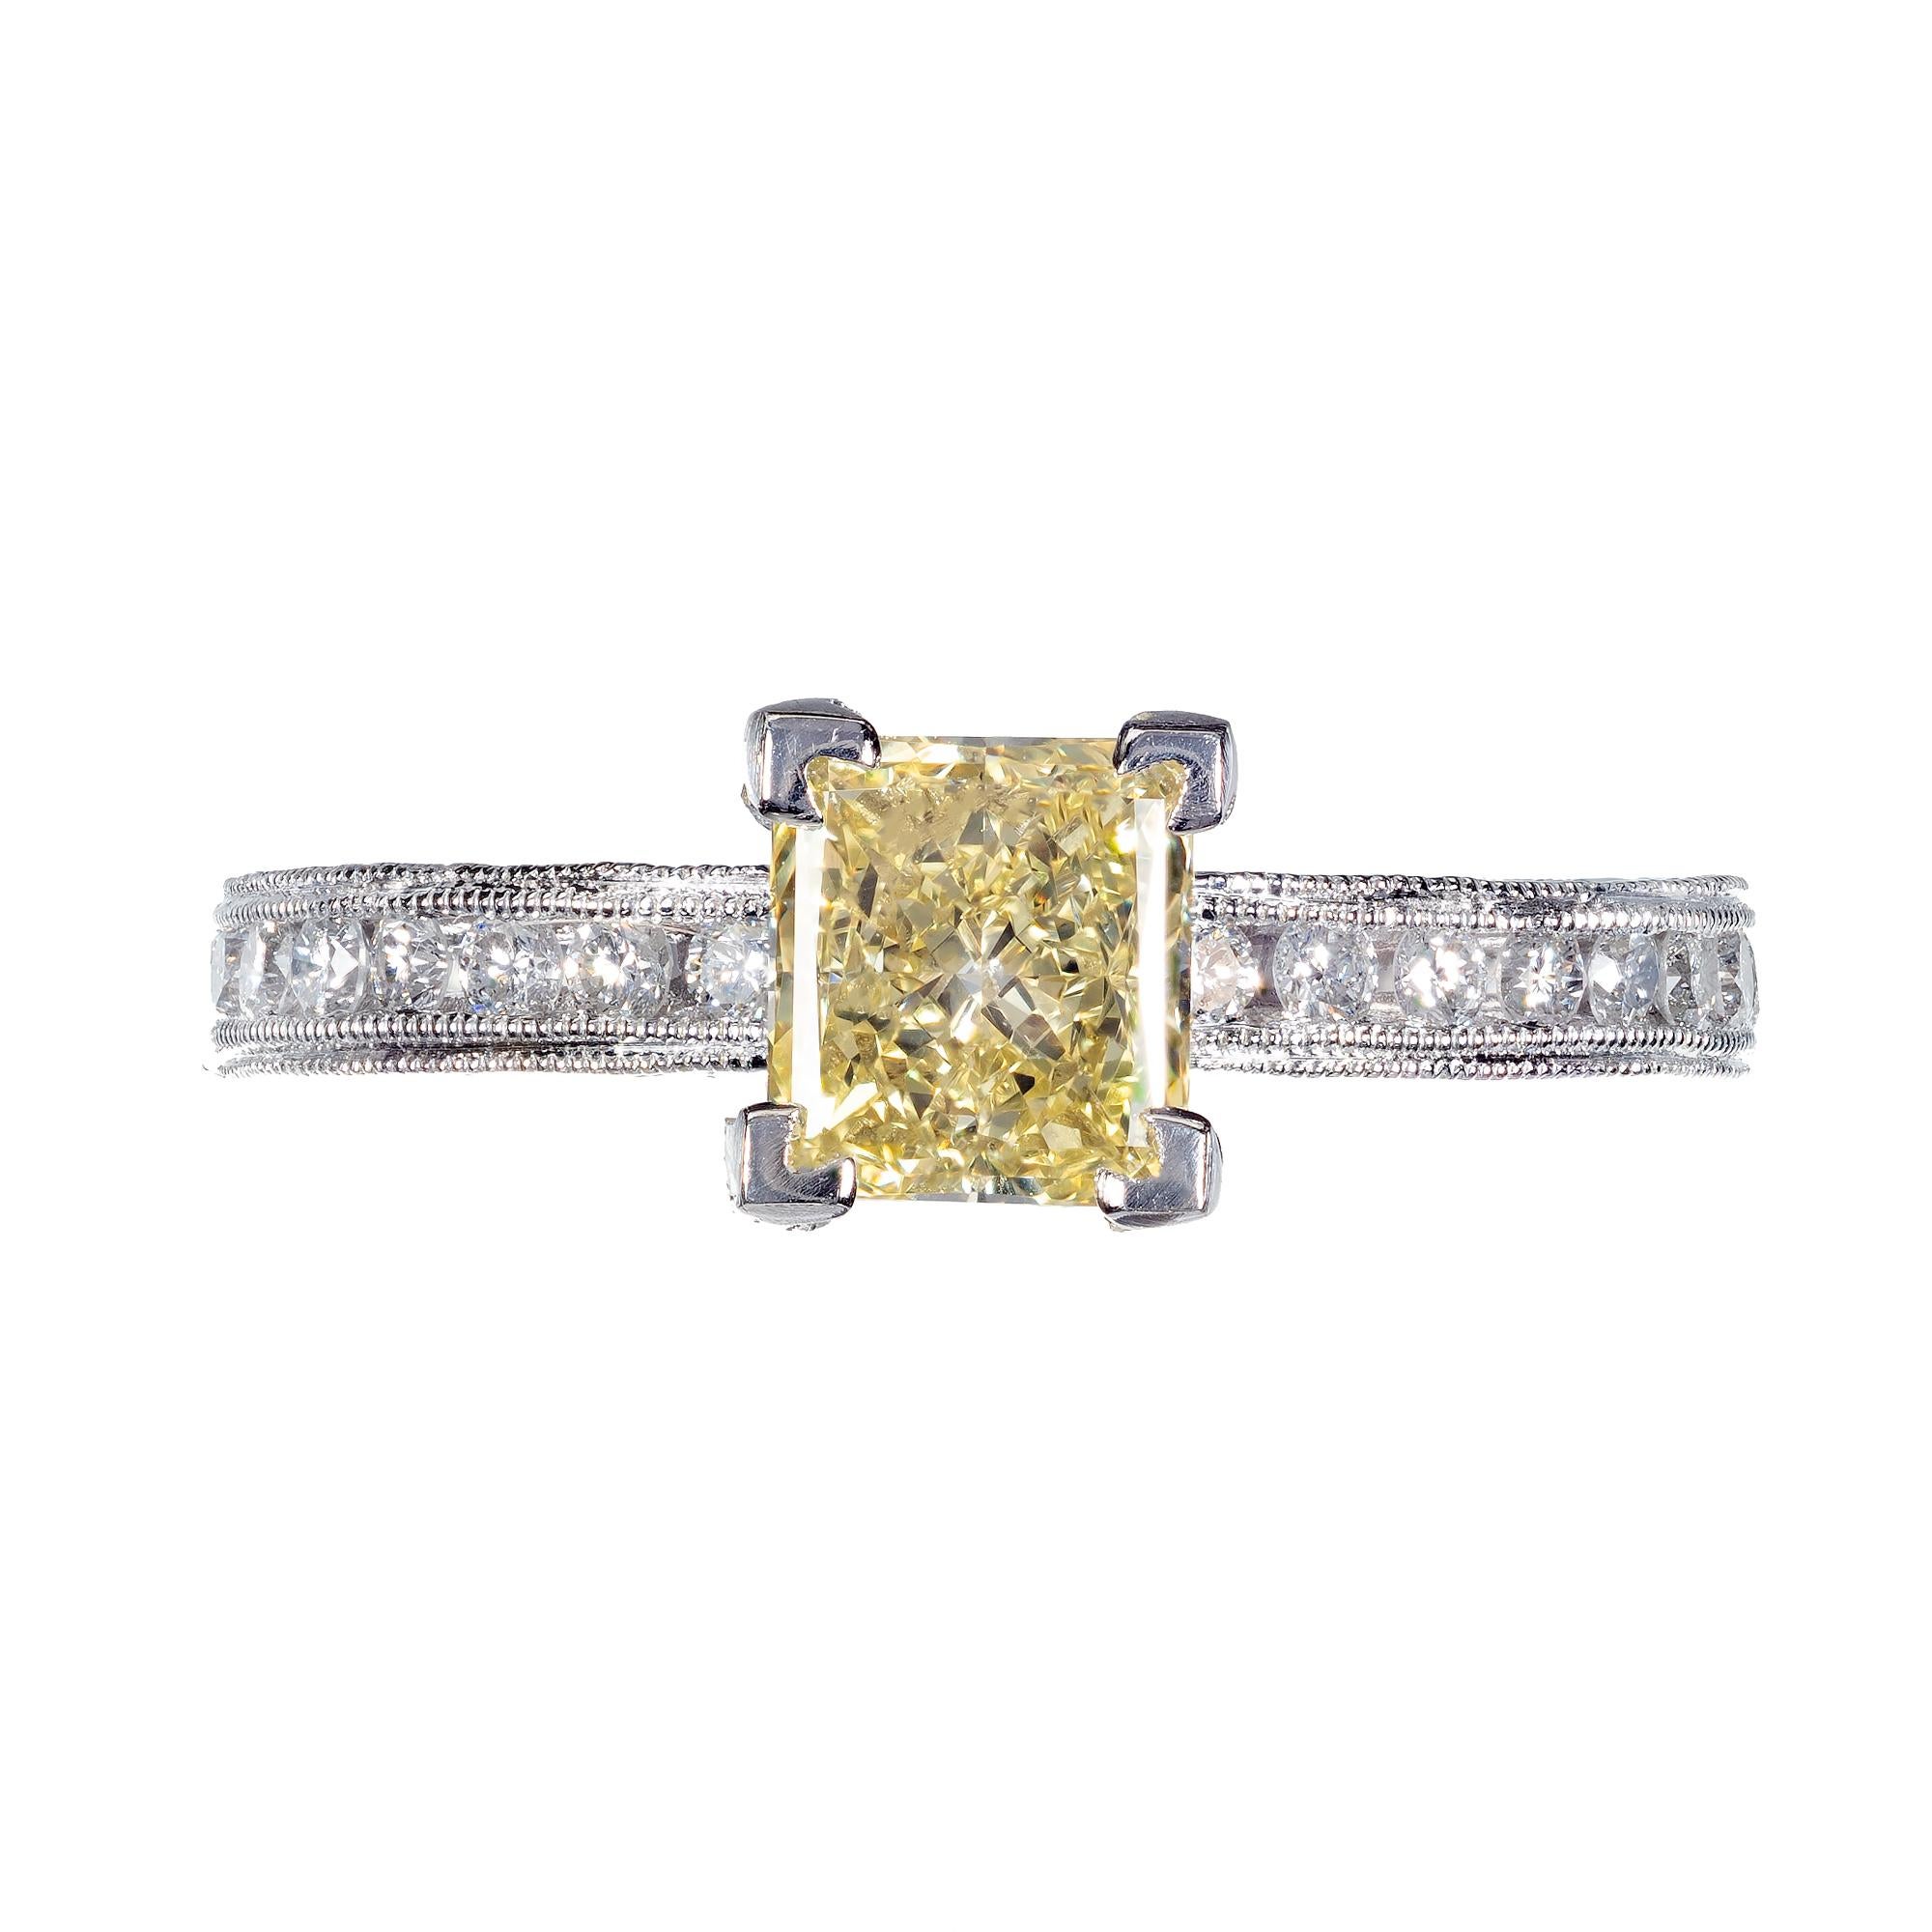 Yellow and white diamond engagement ring. Princess cut fancy yellow center stone, in a hand engraved platinum setting with beaded channel set shoulders and pave accent diamonds. GIA certified natural fancy yellow.

1 princess cut fancy yellow VS